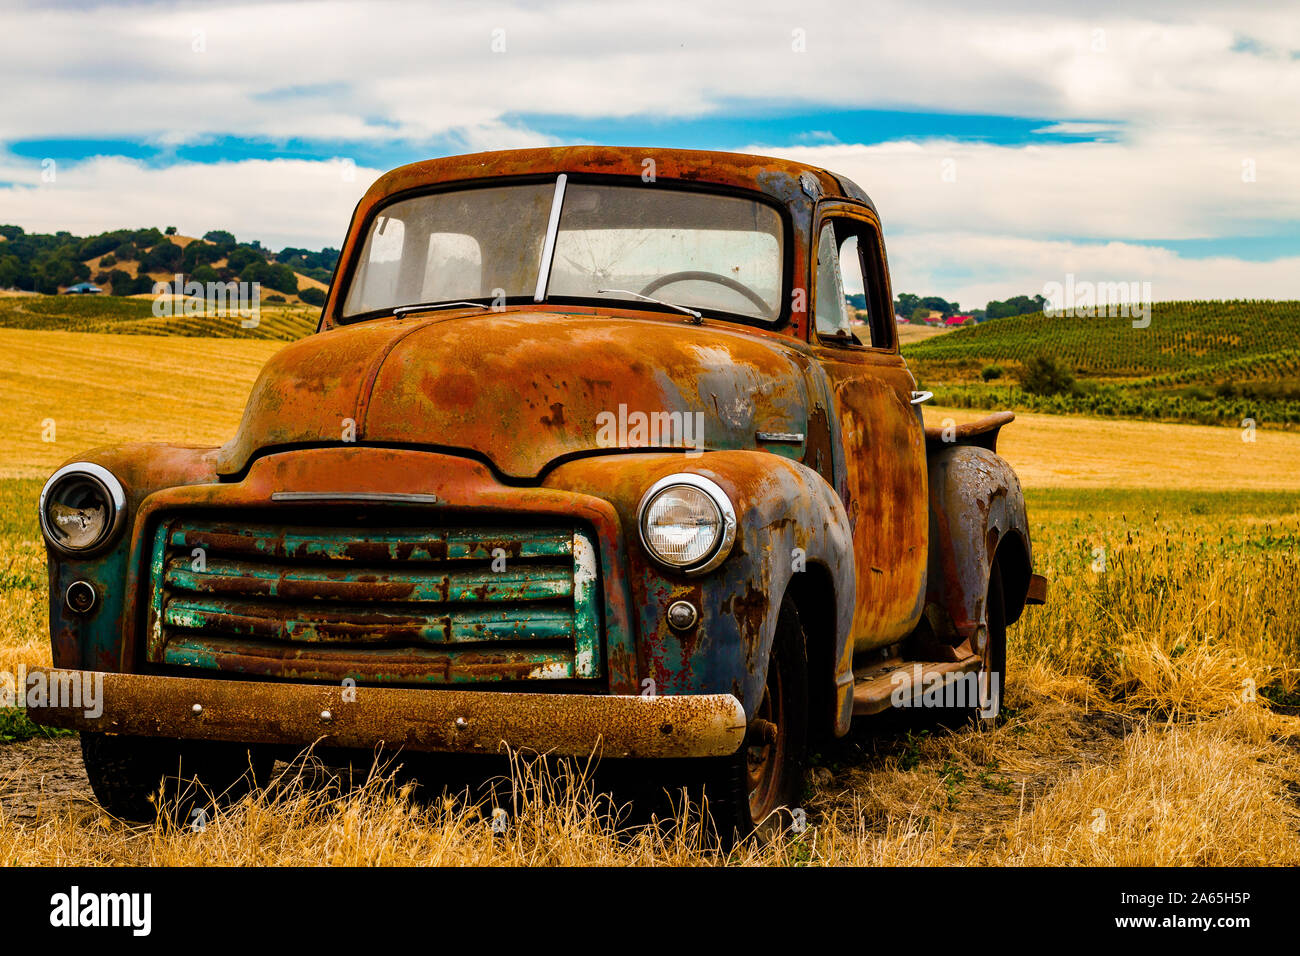 Vintage truck rusted in field Stock Photo